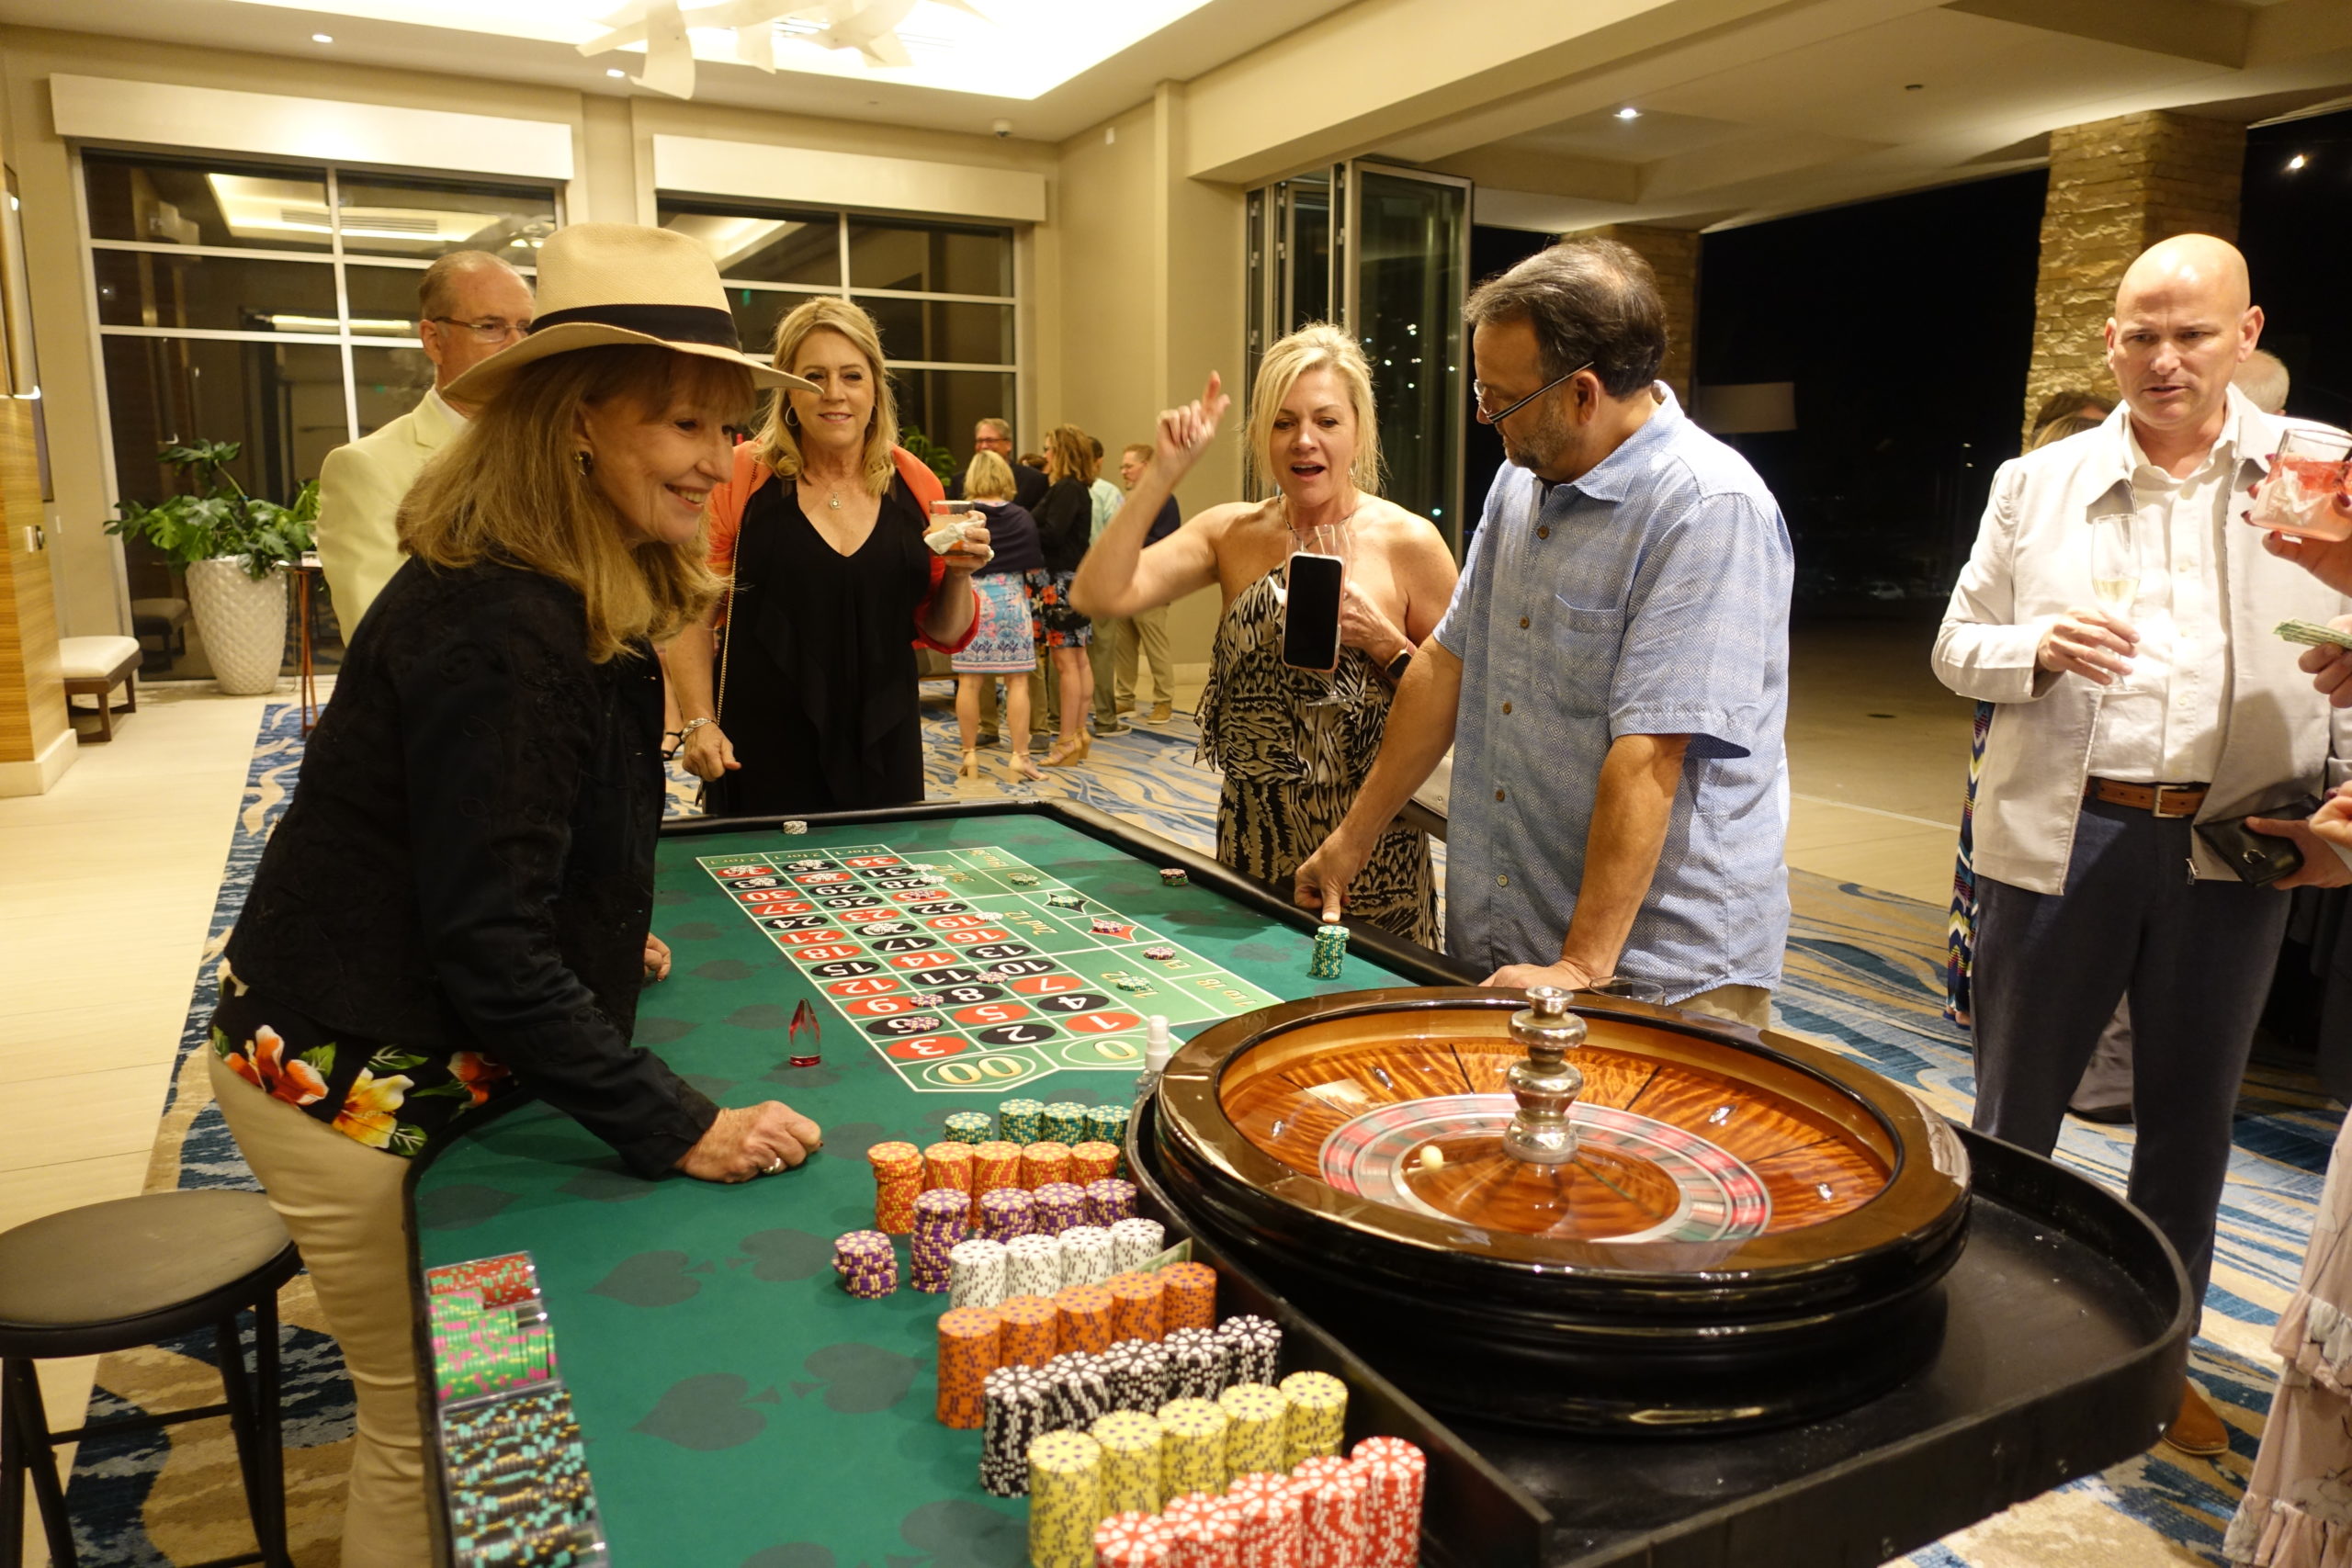 A Full Roulette Table At A Casino-themed Event